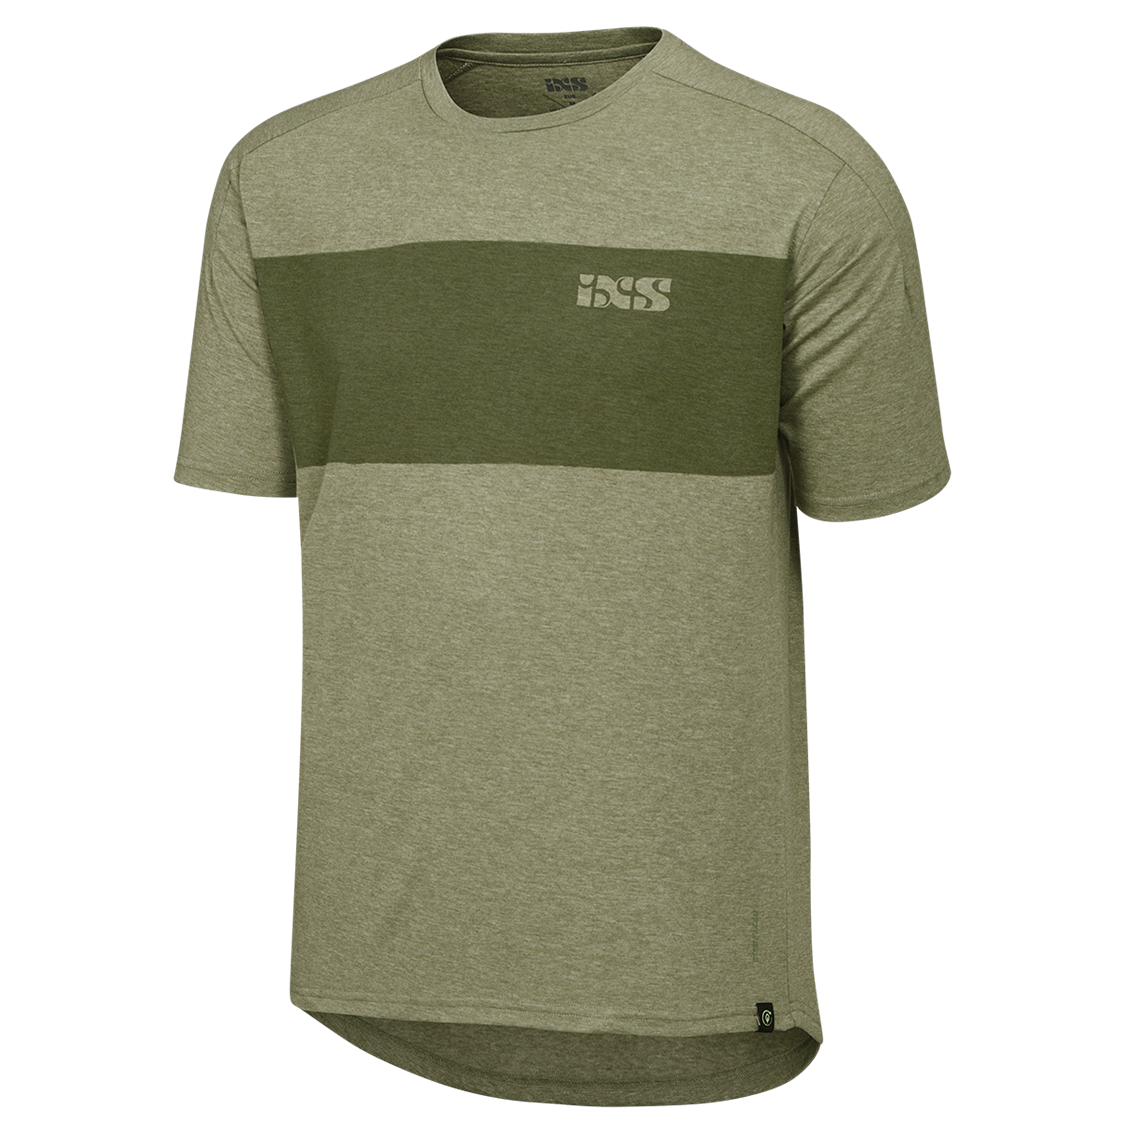 473-510-3352-172_01 Flow Censored Tech Tee Olive